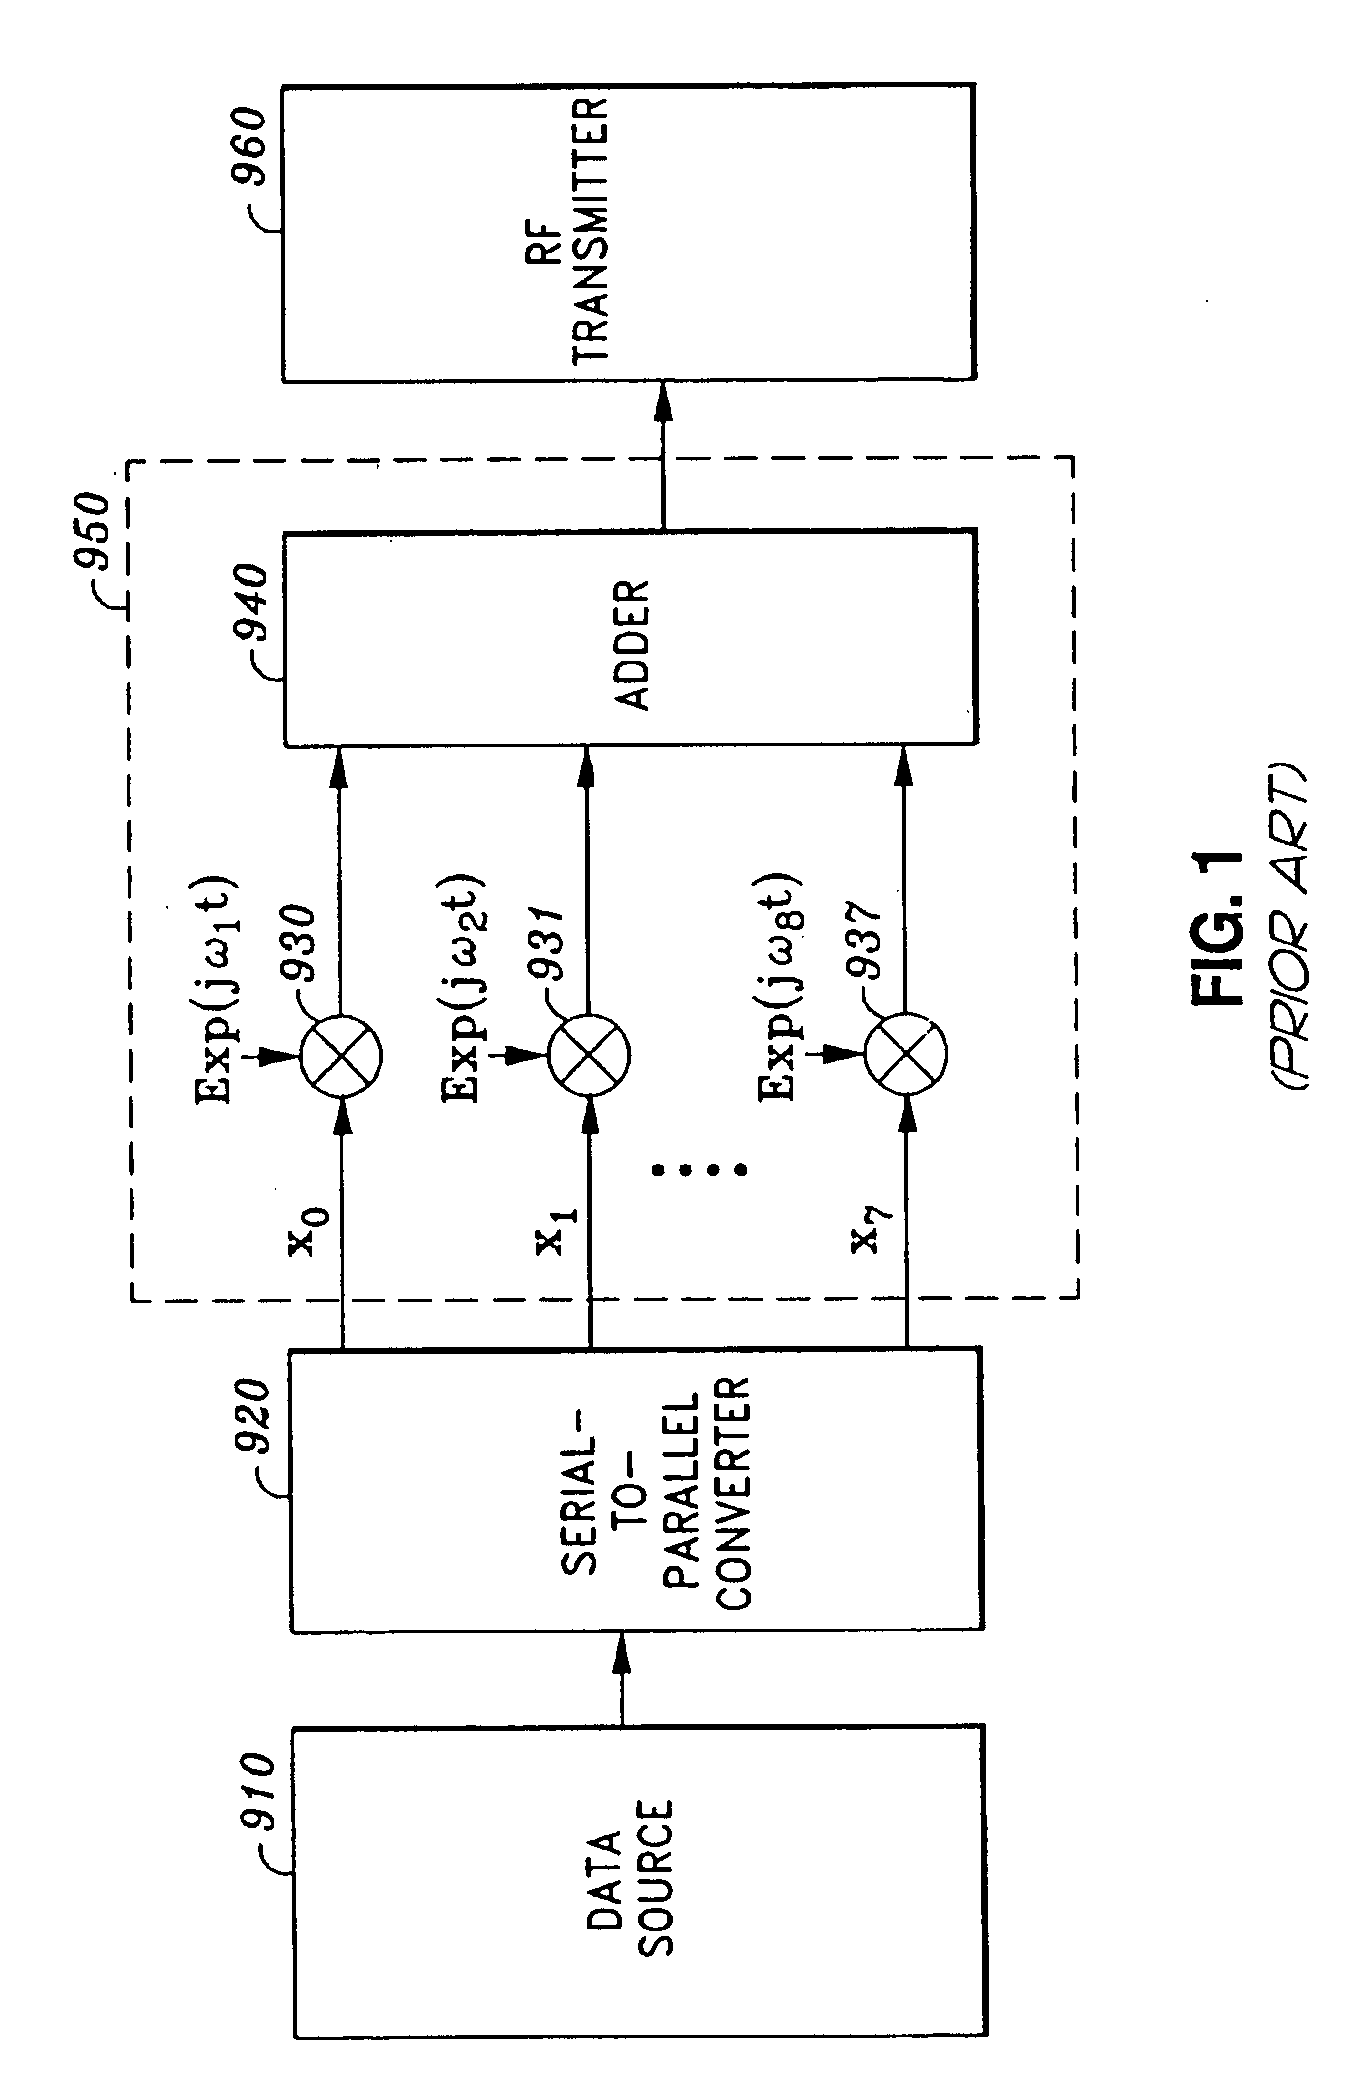 Device and method for the dynamic allocation of frequencies for multicarrier modulation systems